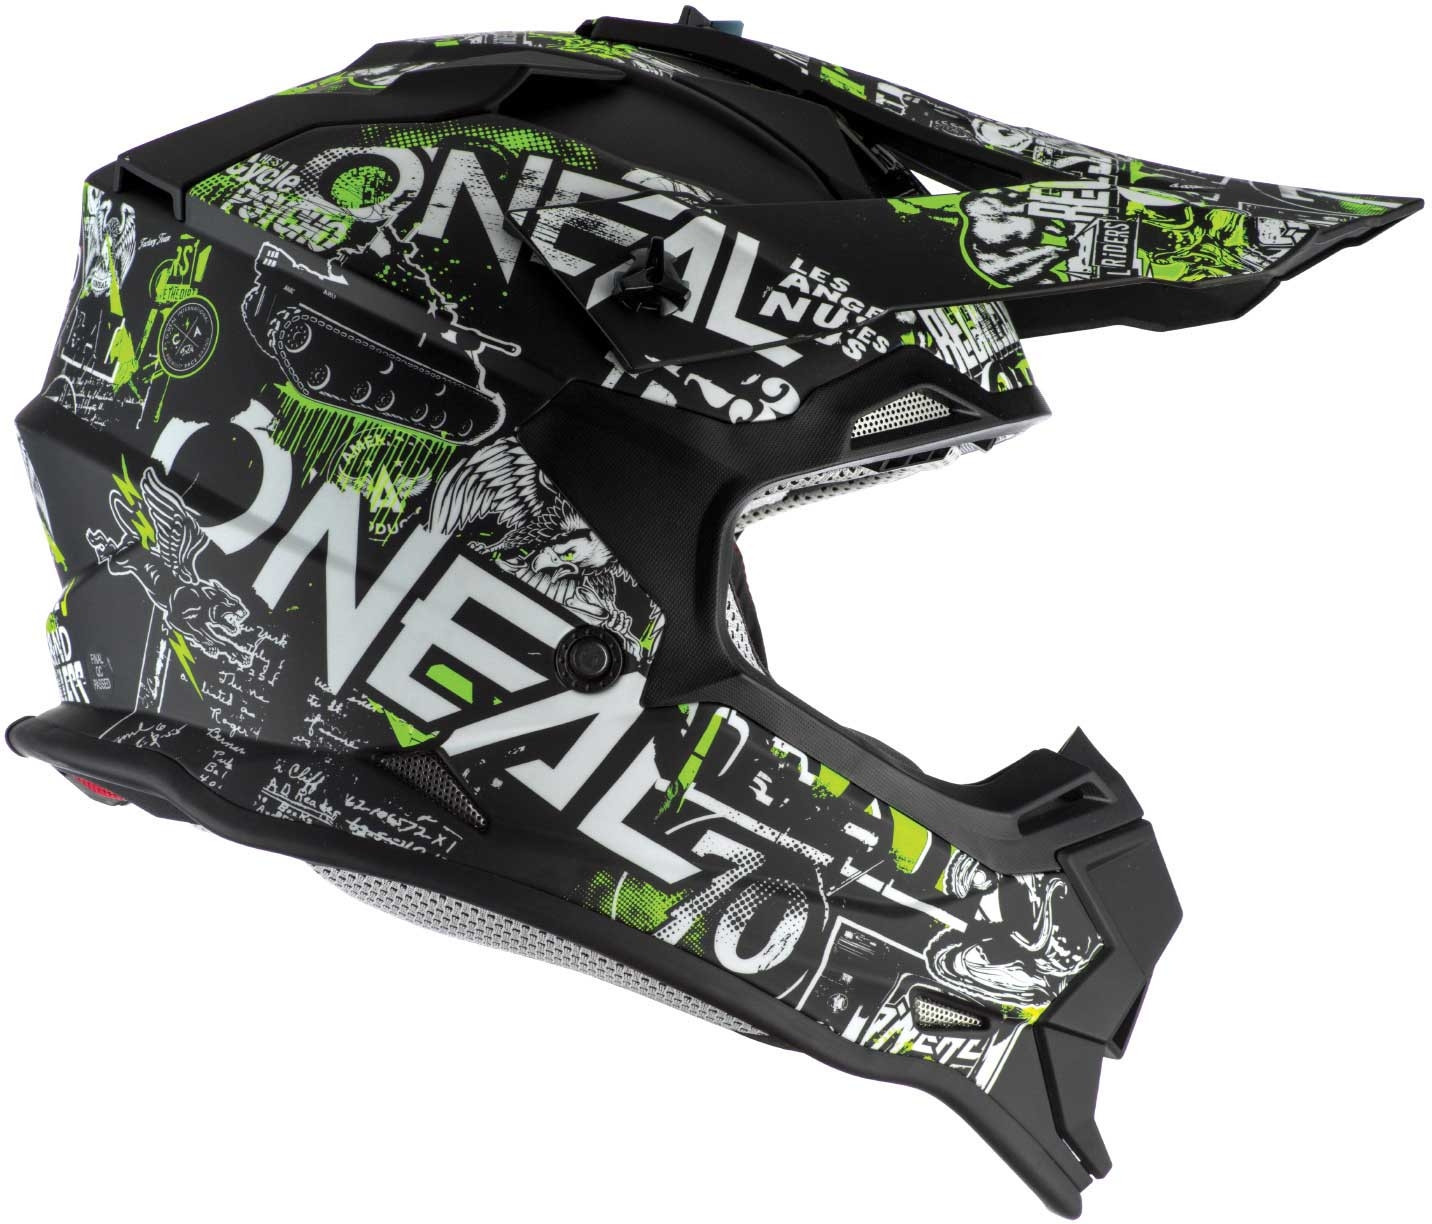 O'Neal Youth 2 SRS Attack Helmet 0200-47